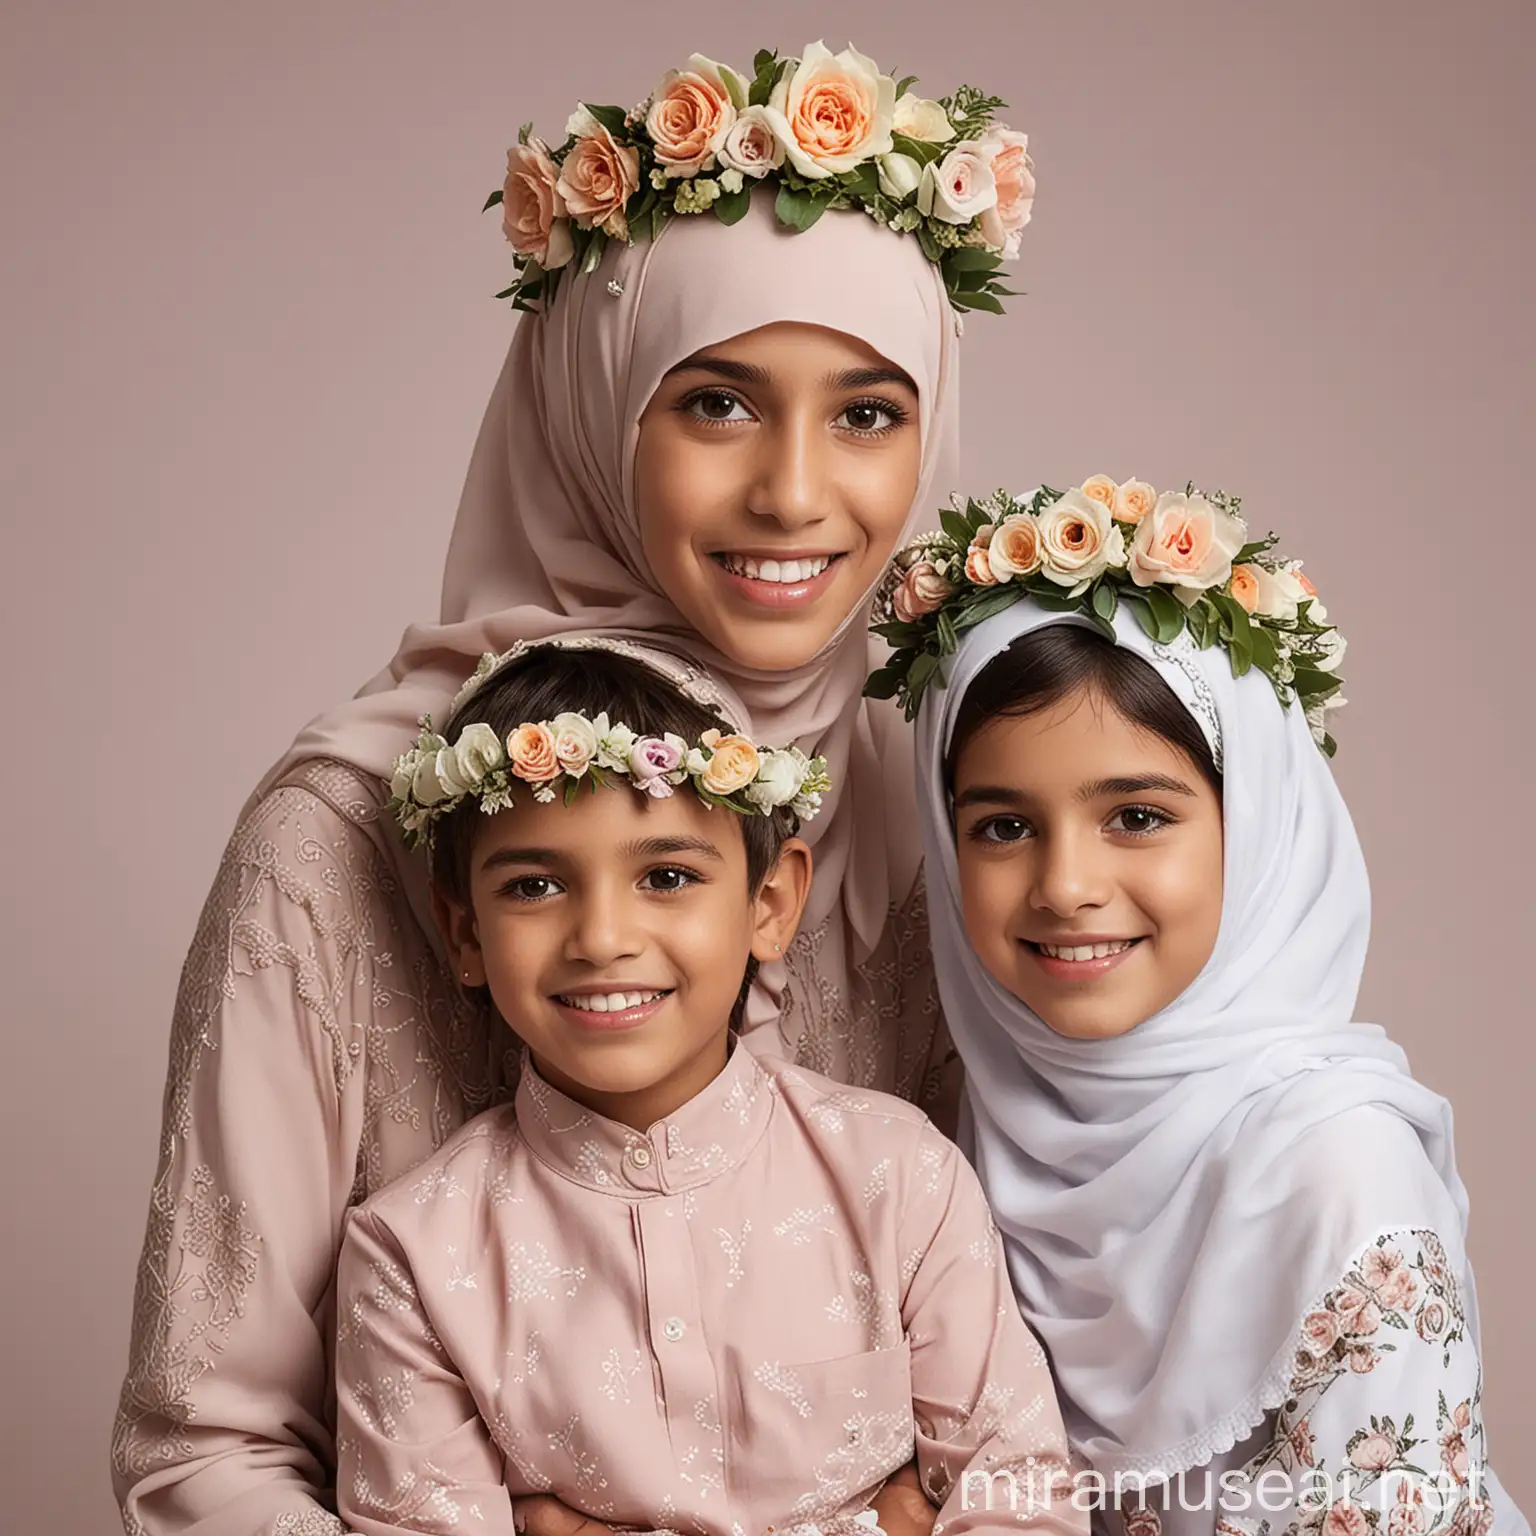 Muslim Woman and Children Wearing Flower Crowns in Serene Setting